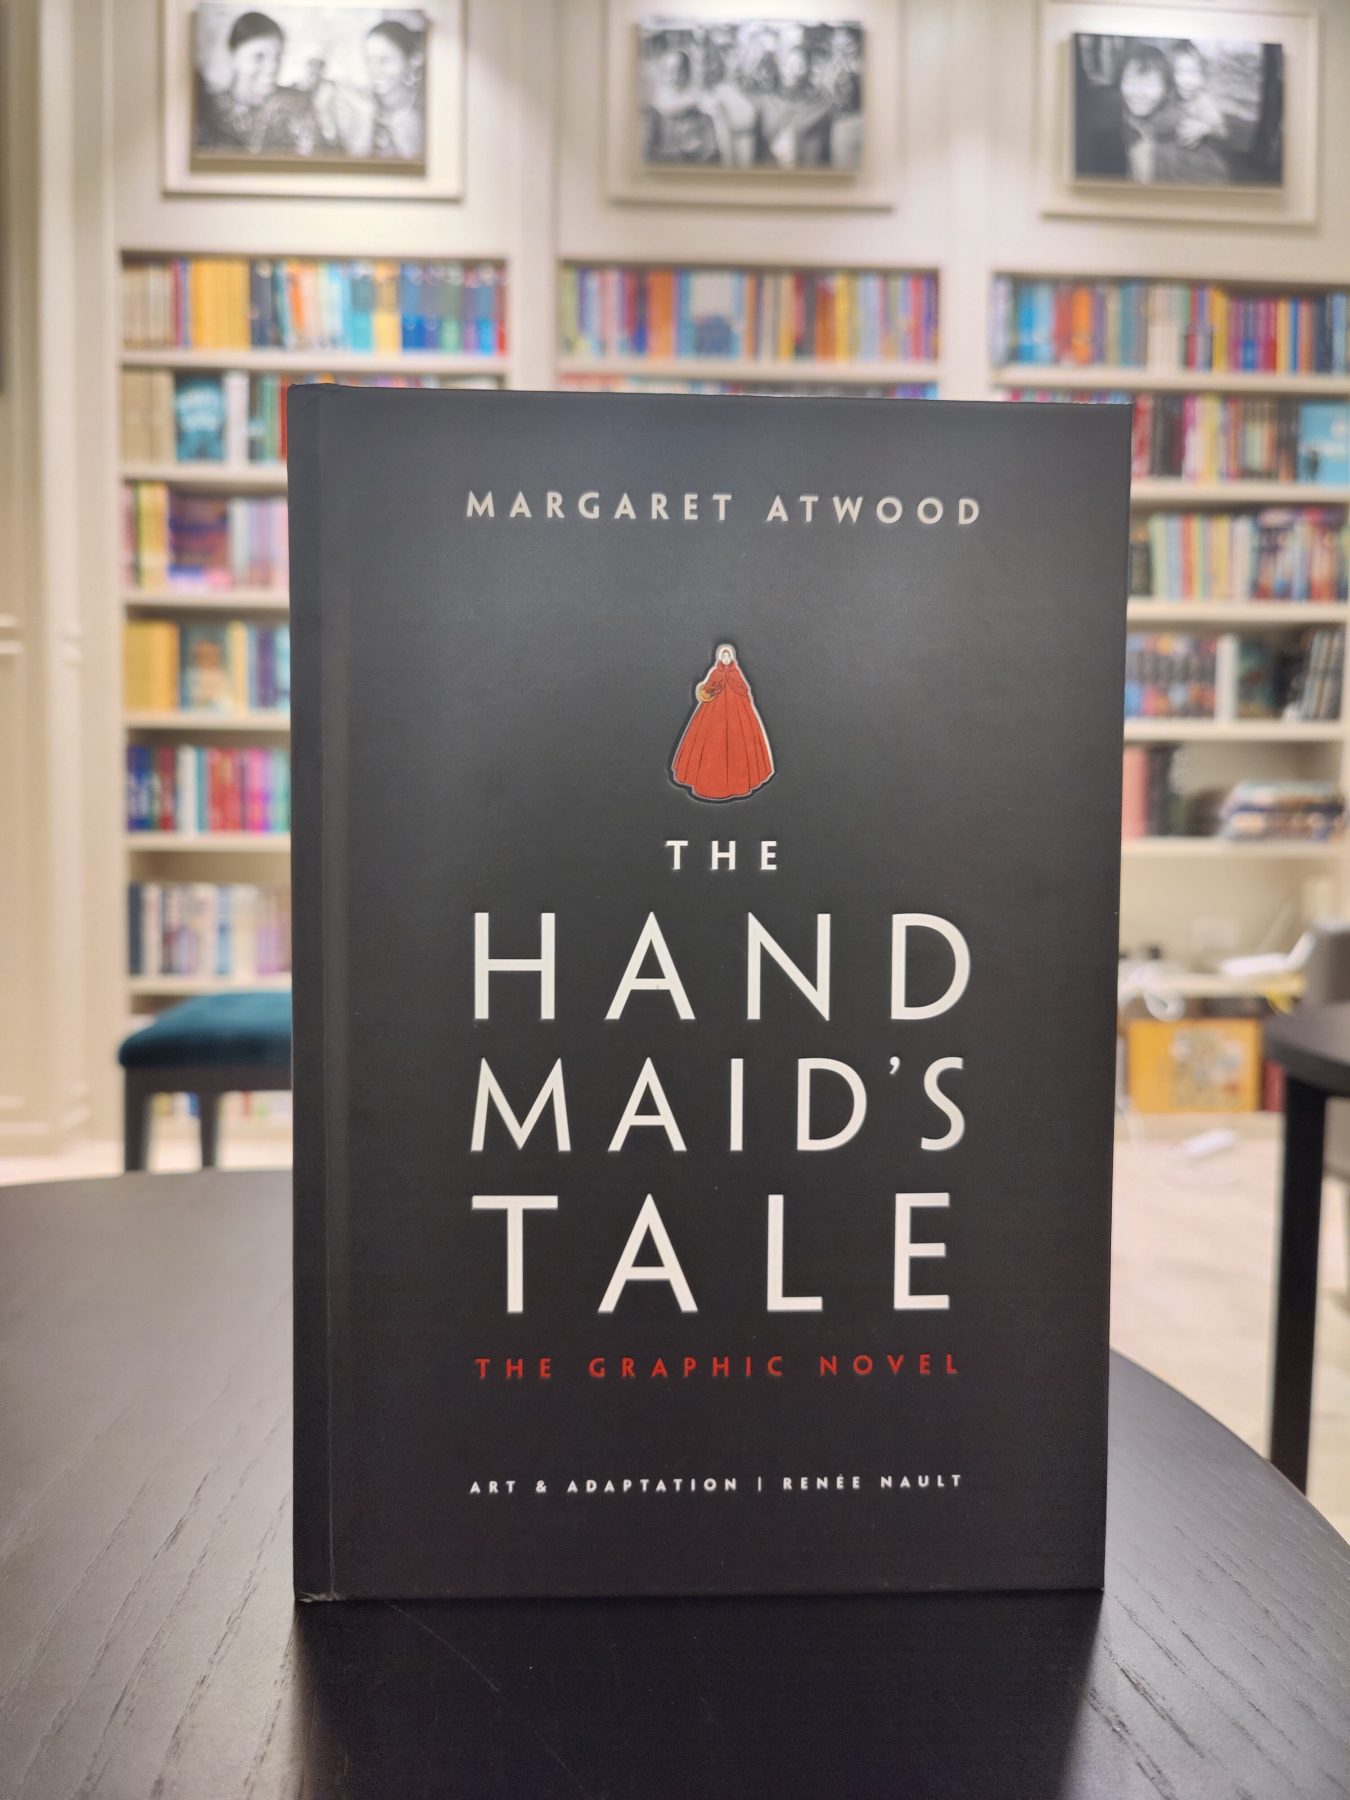 Margaret Atwood’s The Handmaid's Tale, art & adaption by Renée Nault